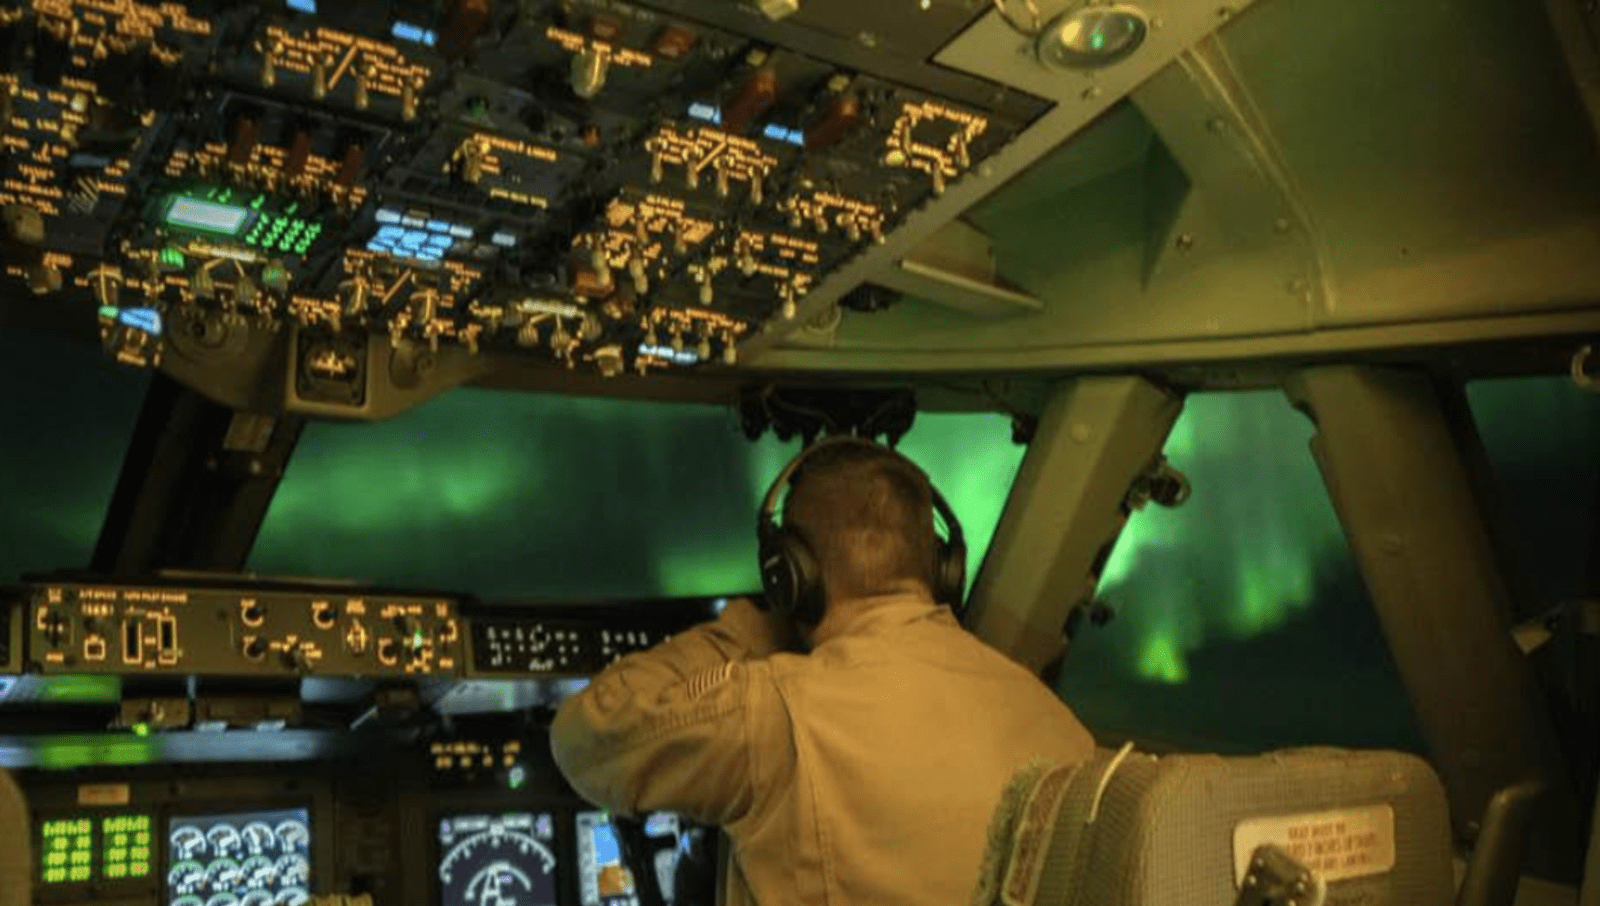 Pilot in plane cockpit with Aurora Australis in front of window 